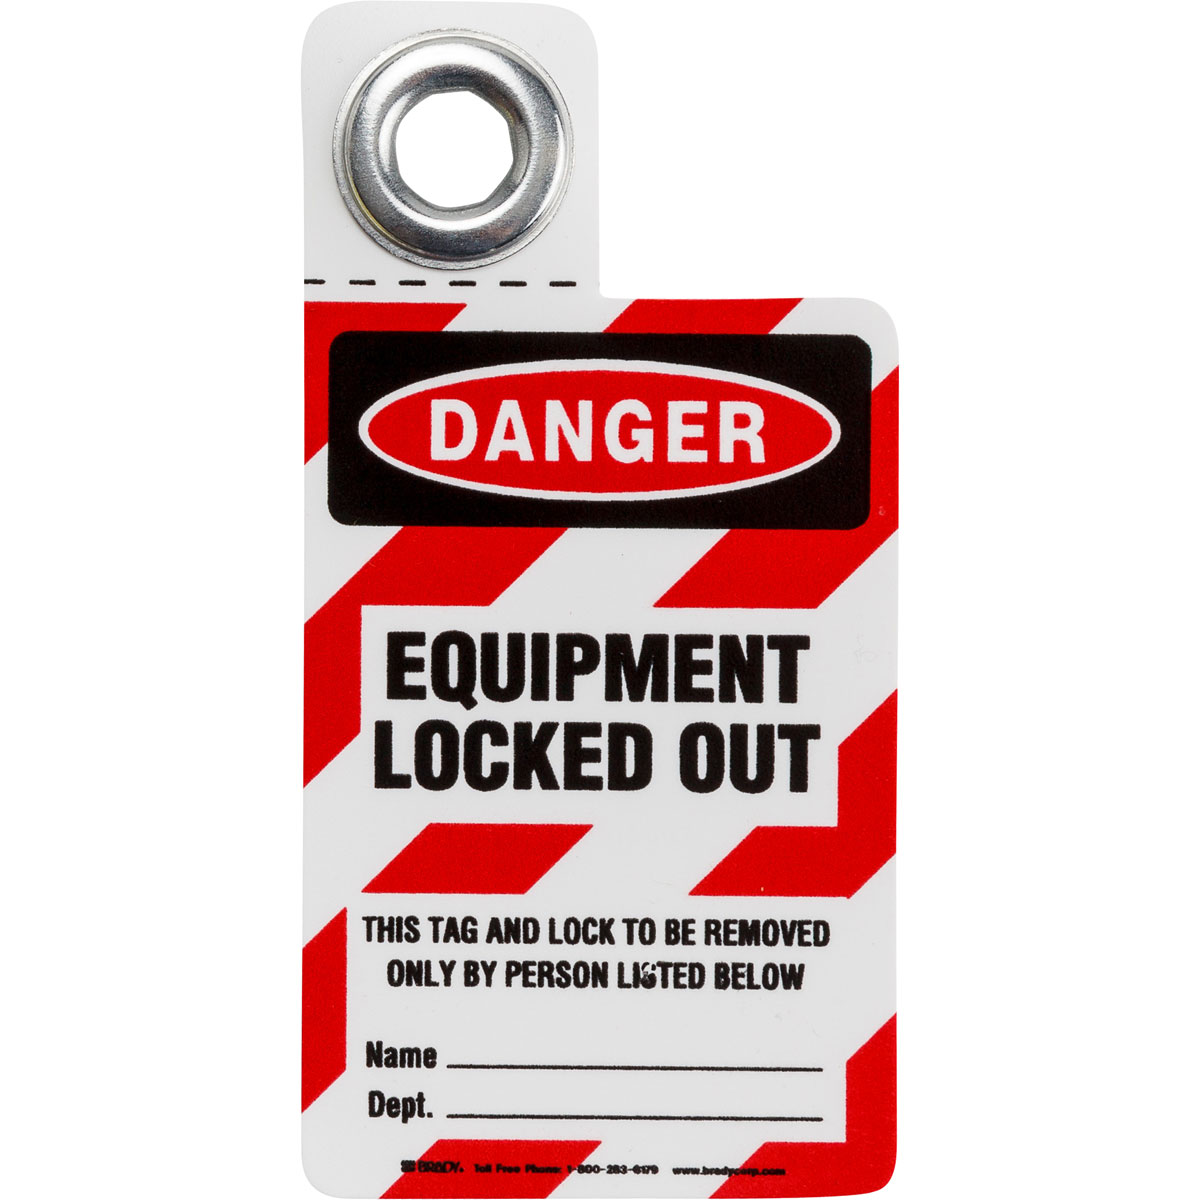 BRDY 105722 EQUIPMENT LOCKOUT TAG WITH PADLOCK GROMMET